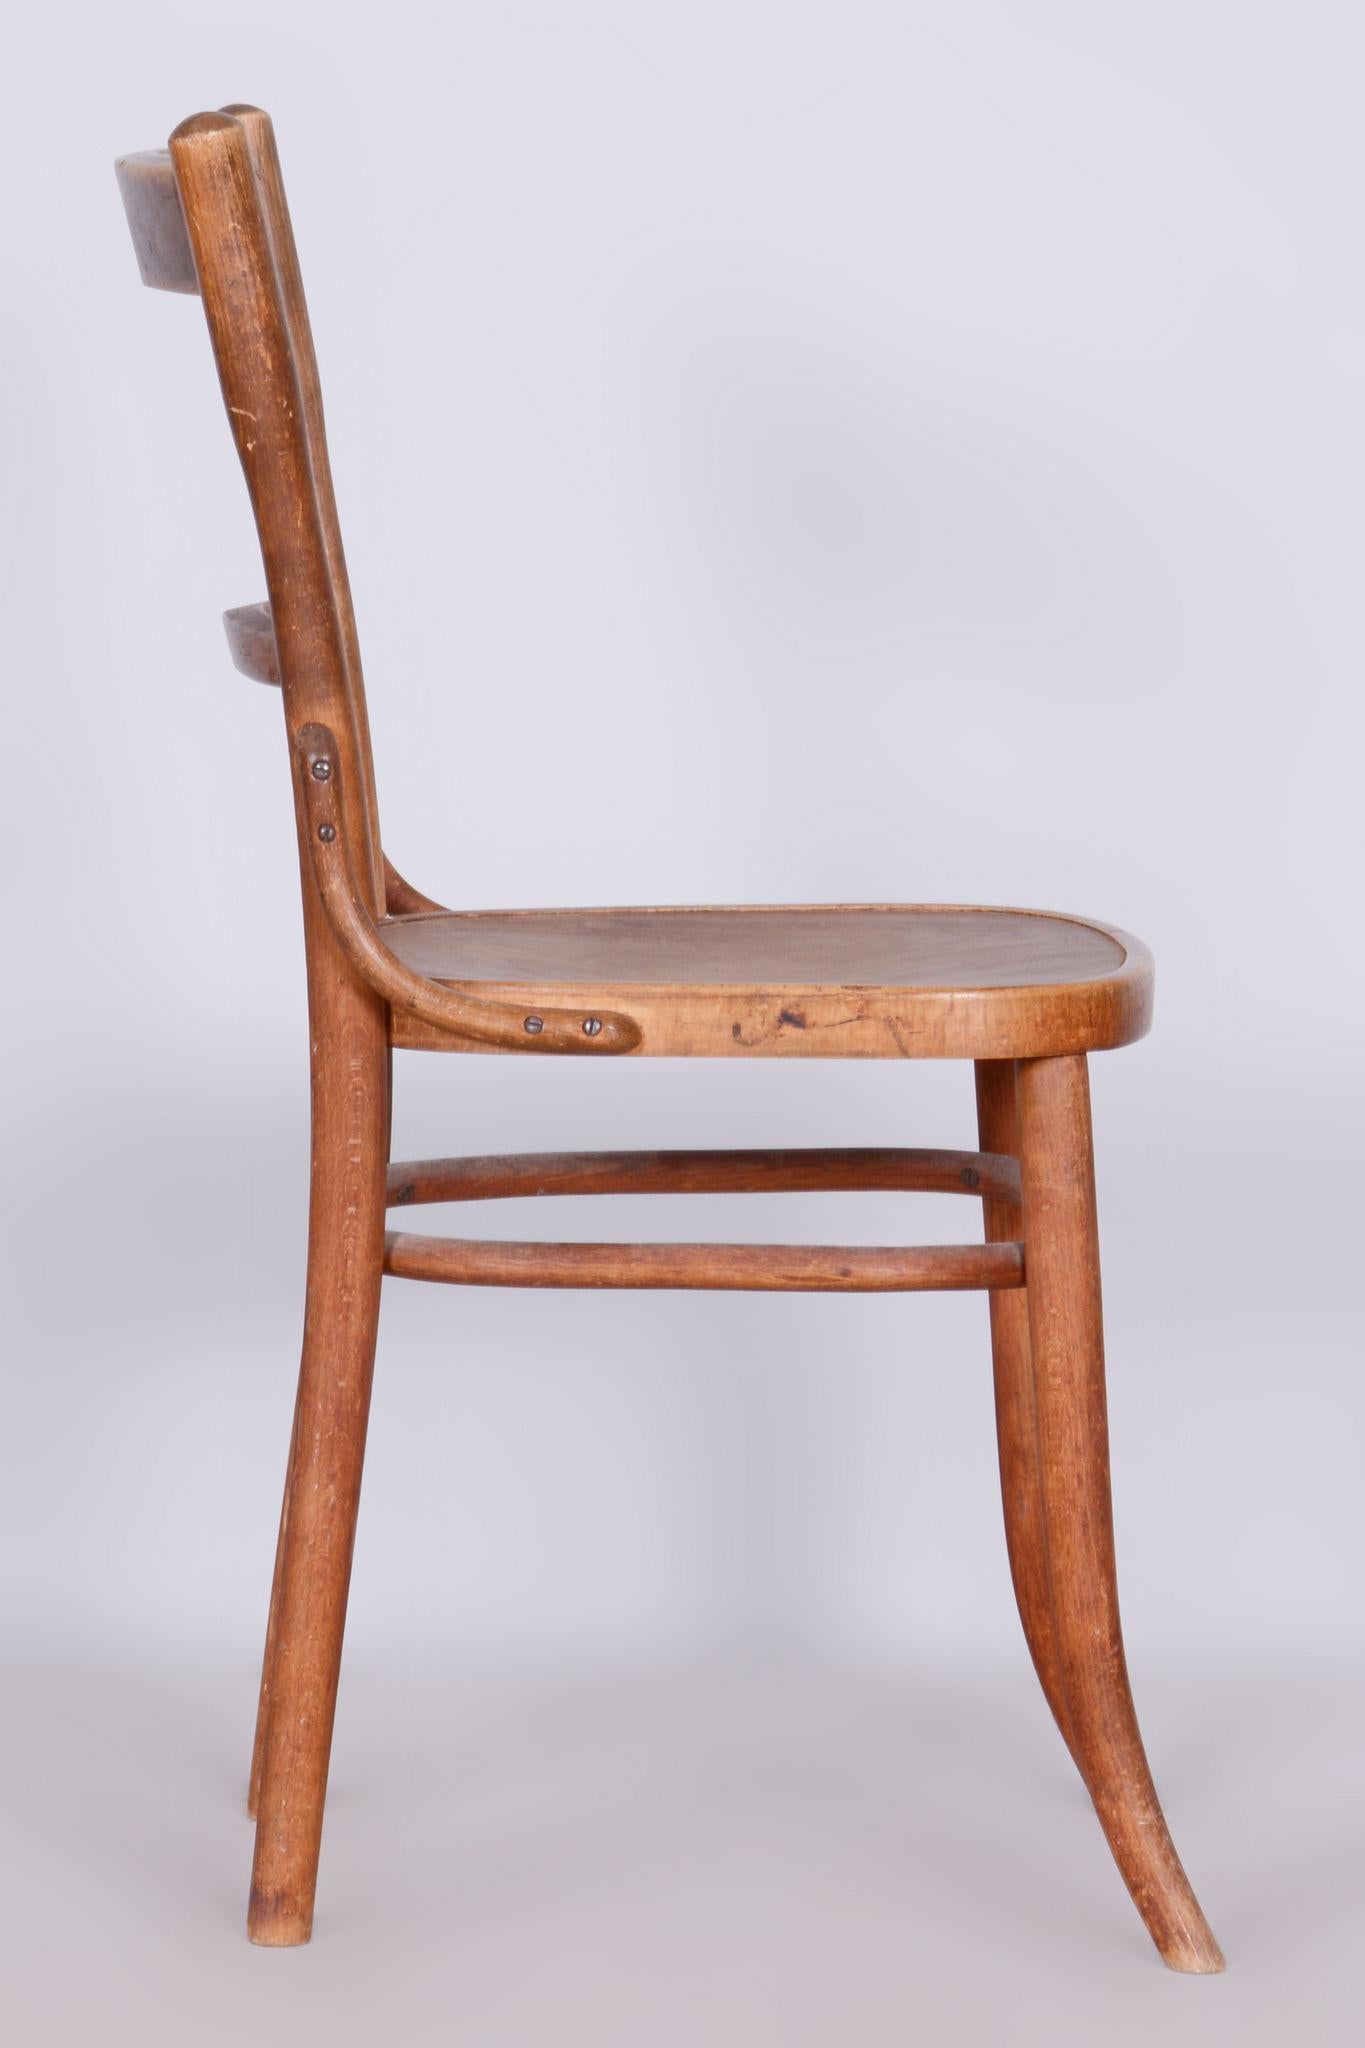 Early 20th Century Original Art Deco Beech Chair, Fischel, Stable Construction, Czechia, 1920s For Sale